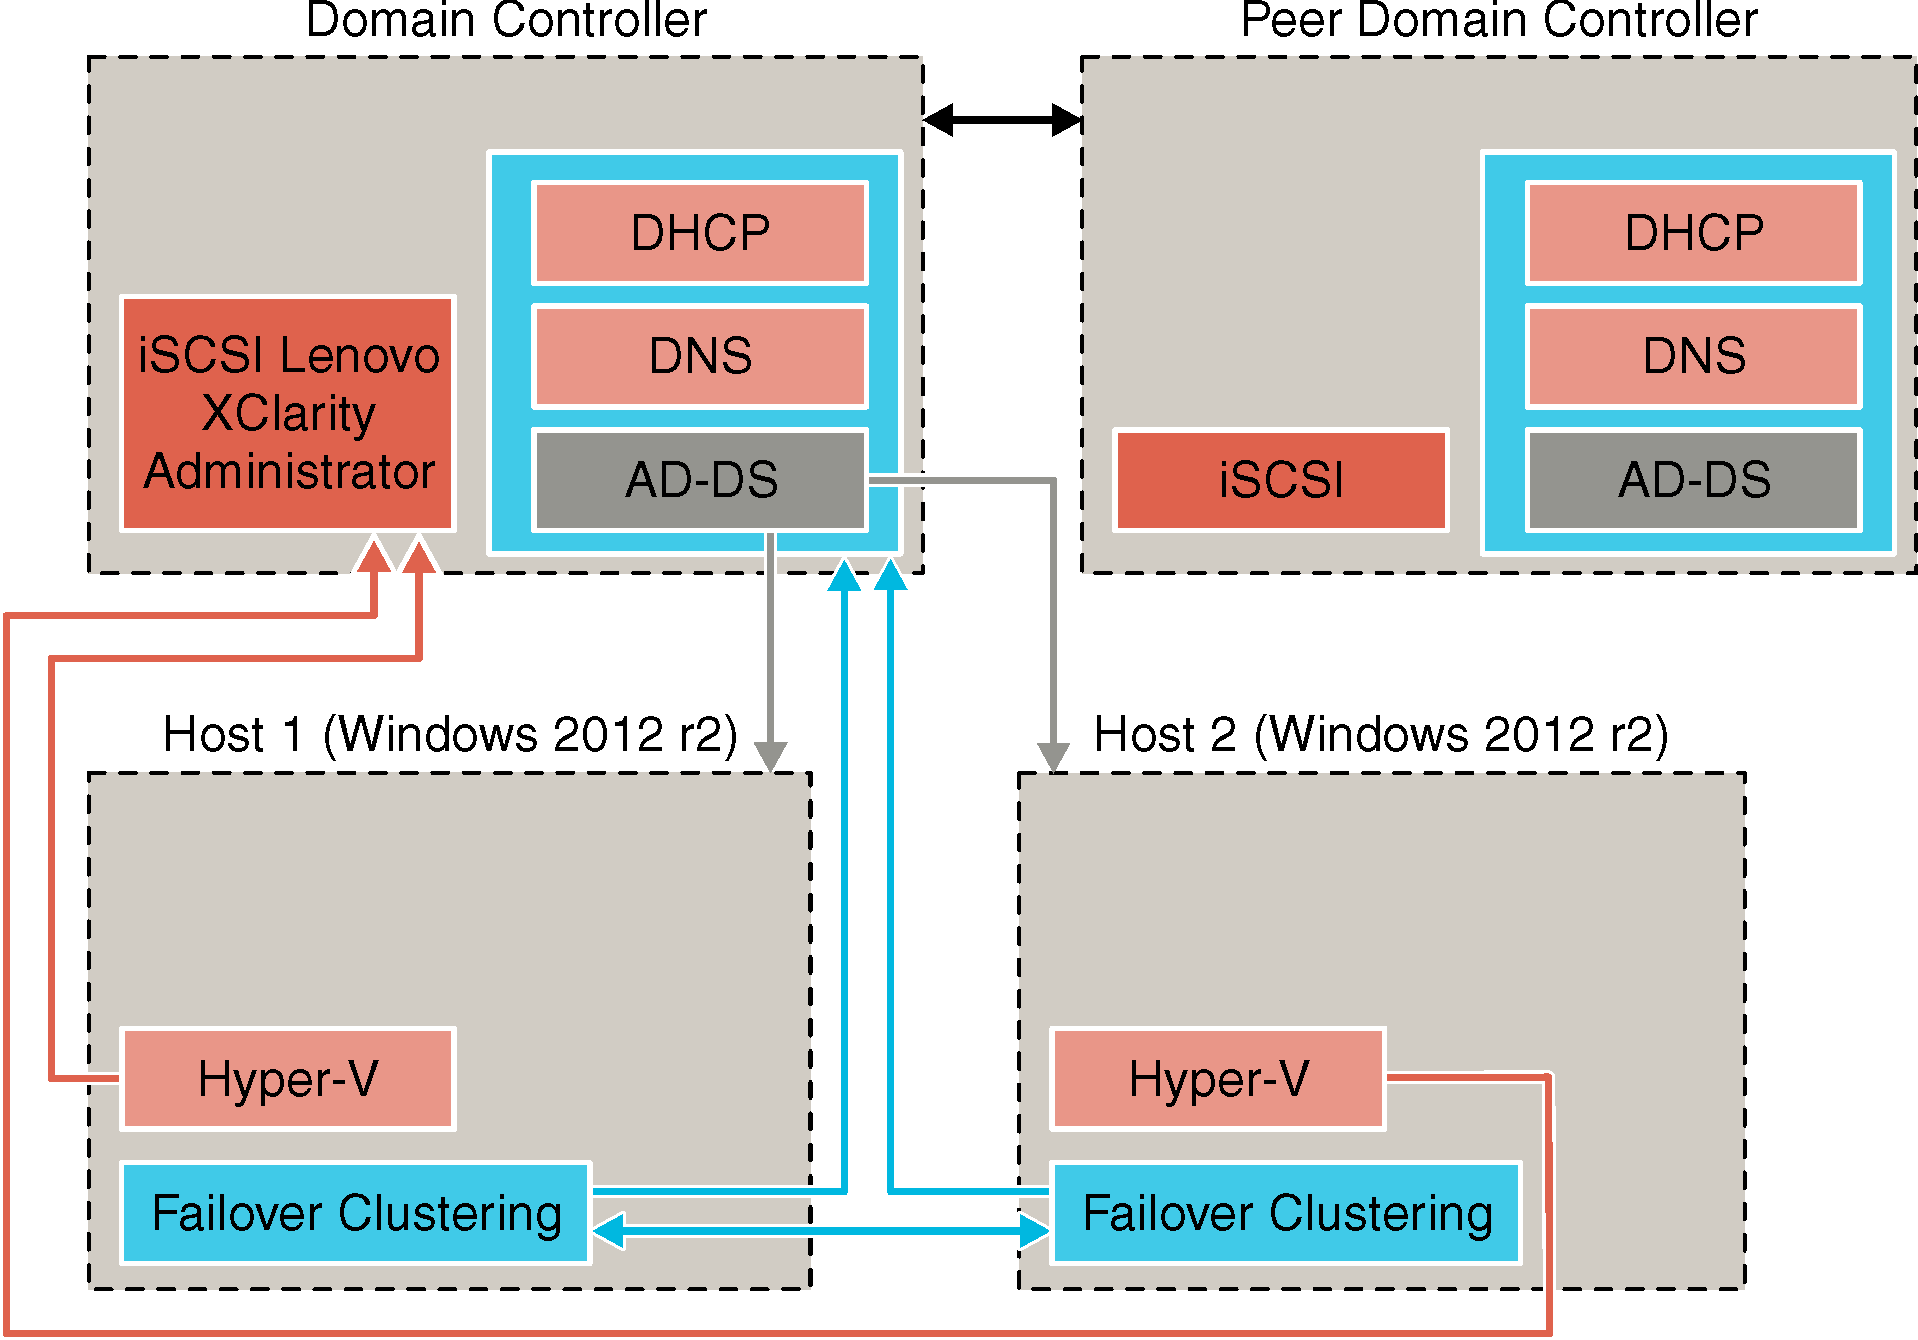 Illustrates how high availability can be achieved in a Microsoft Hyper-V environment